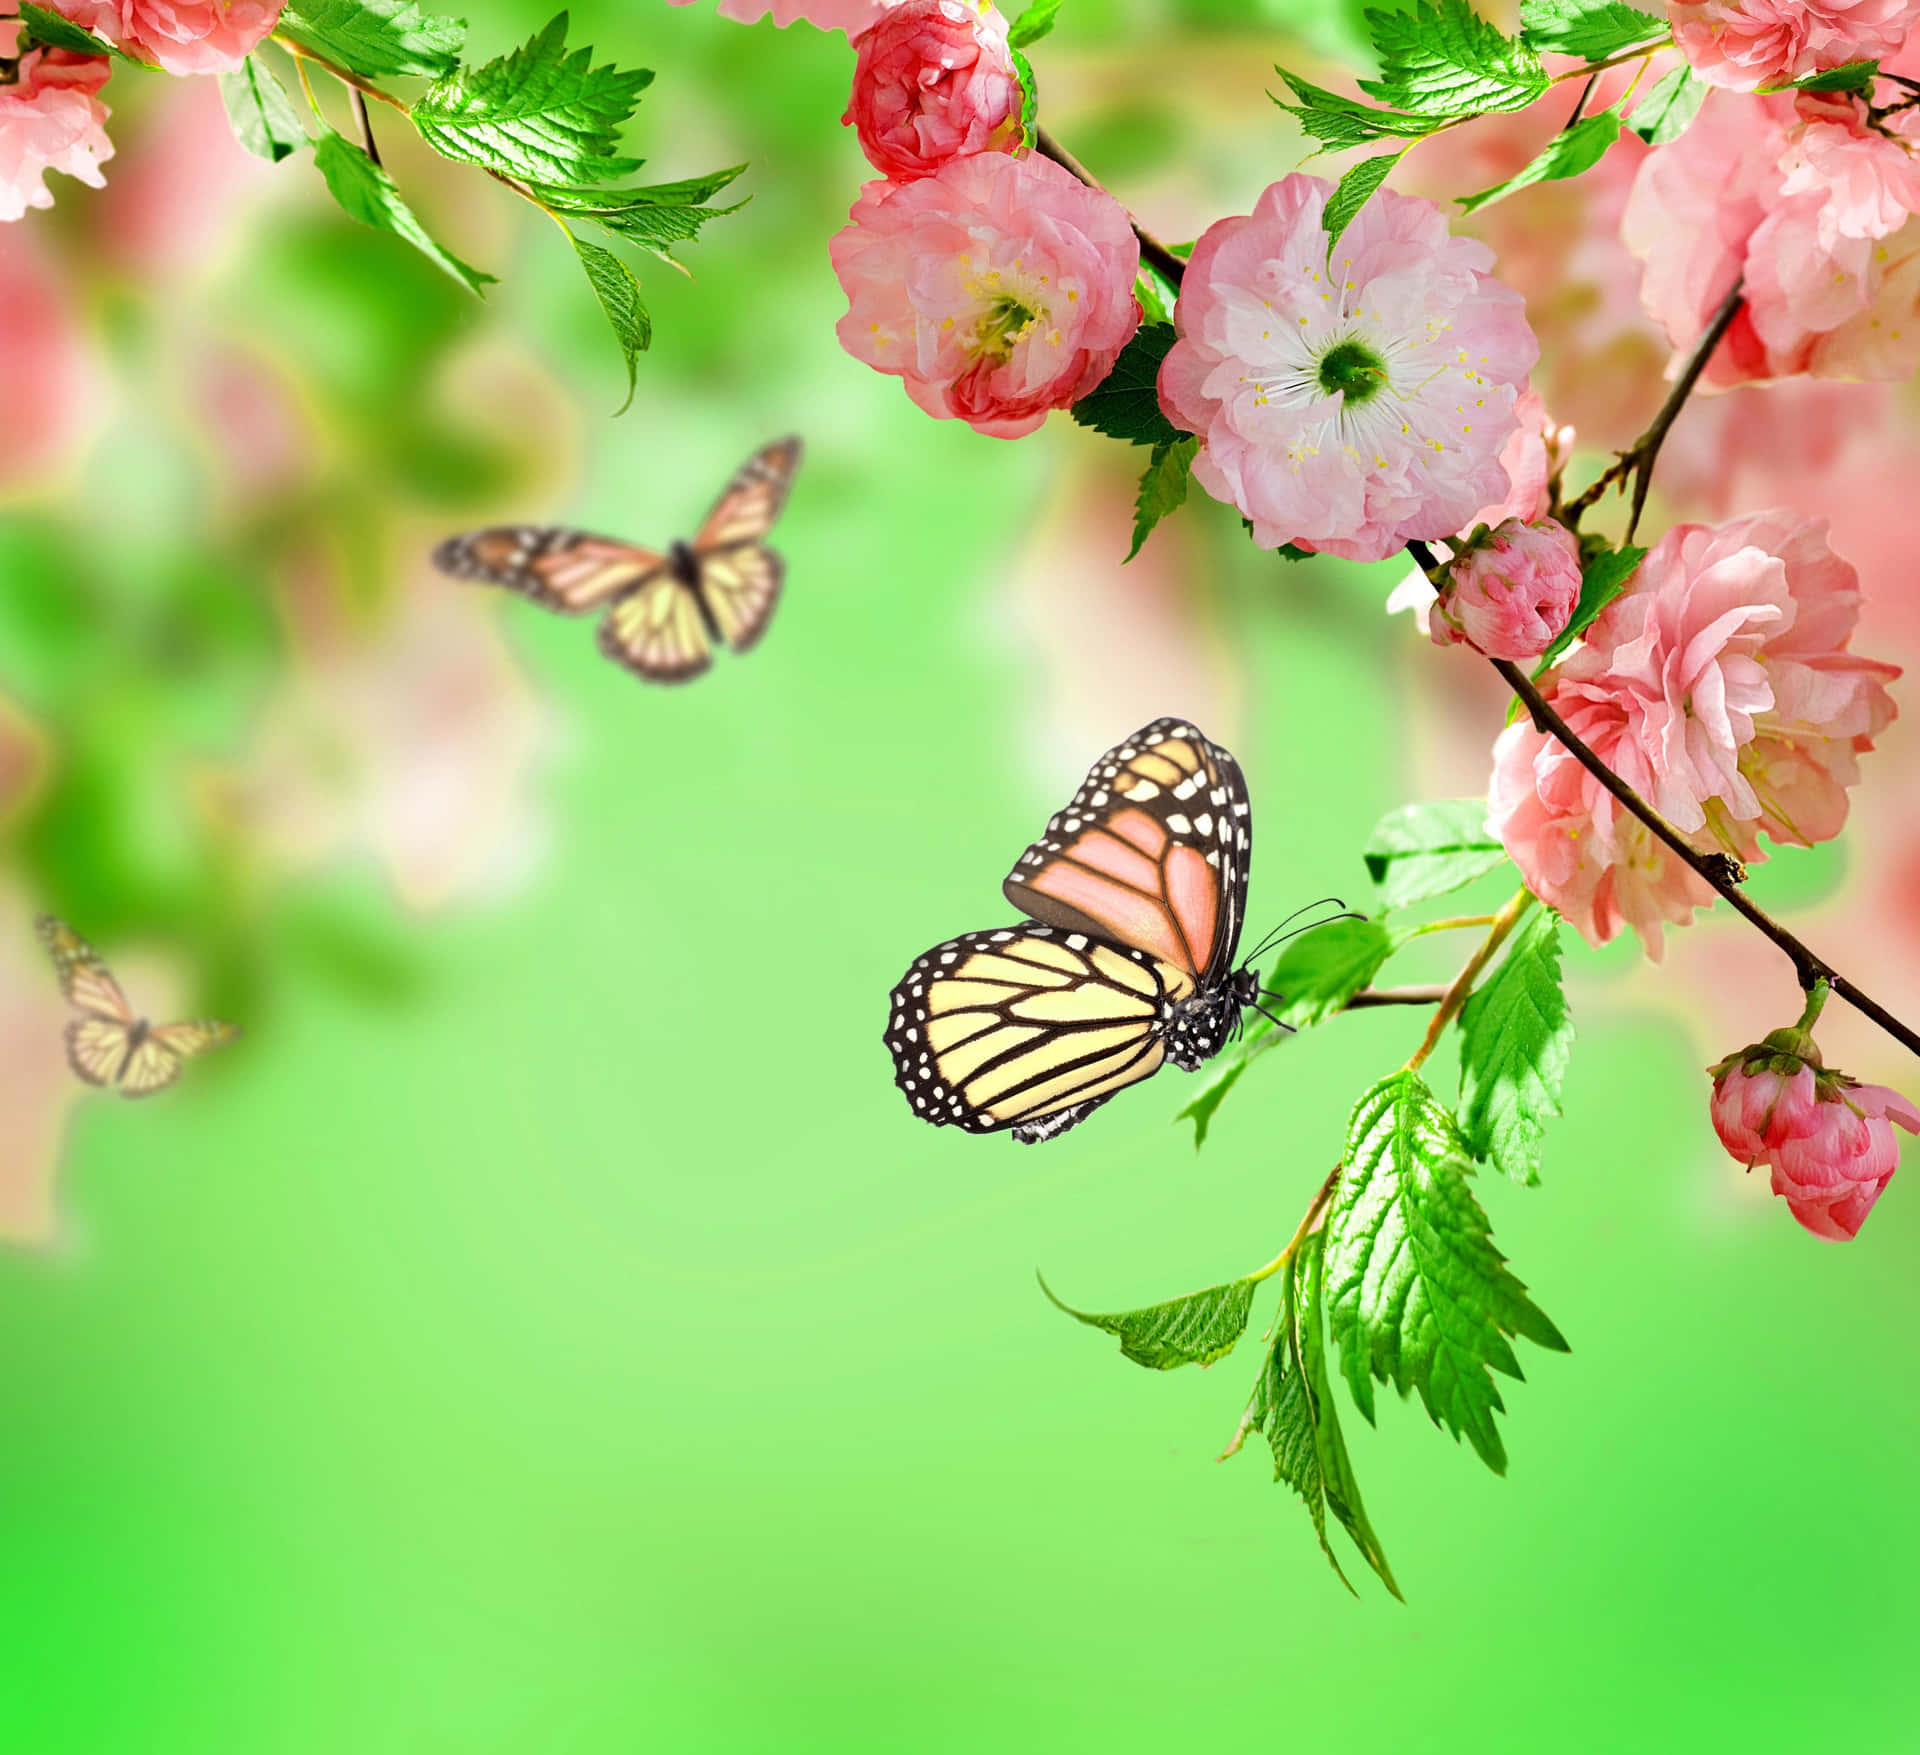 Dream Flower, butterfly Aestheticism, colorful Flowers, Butterfly